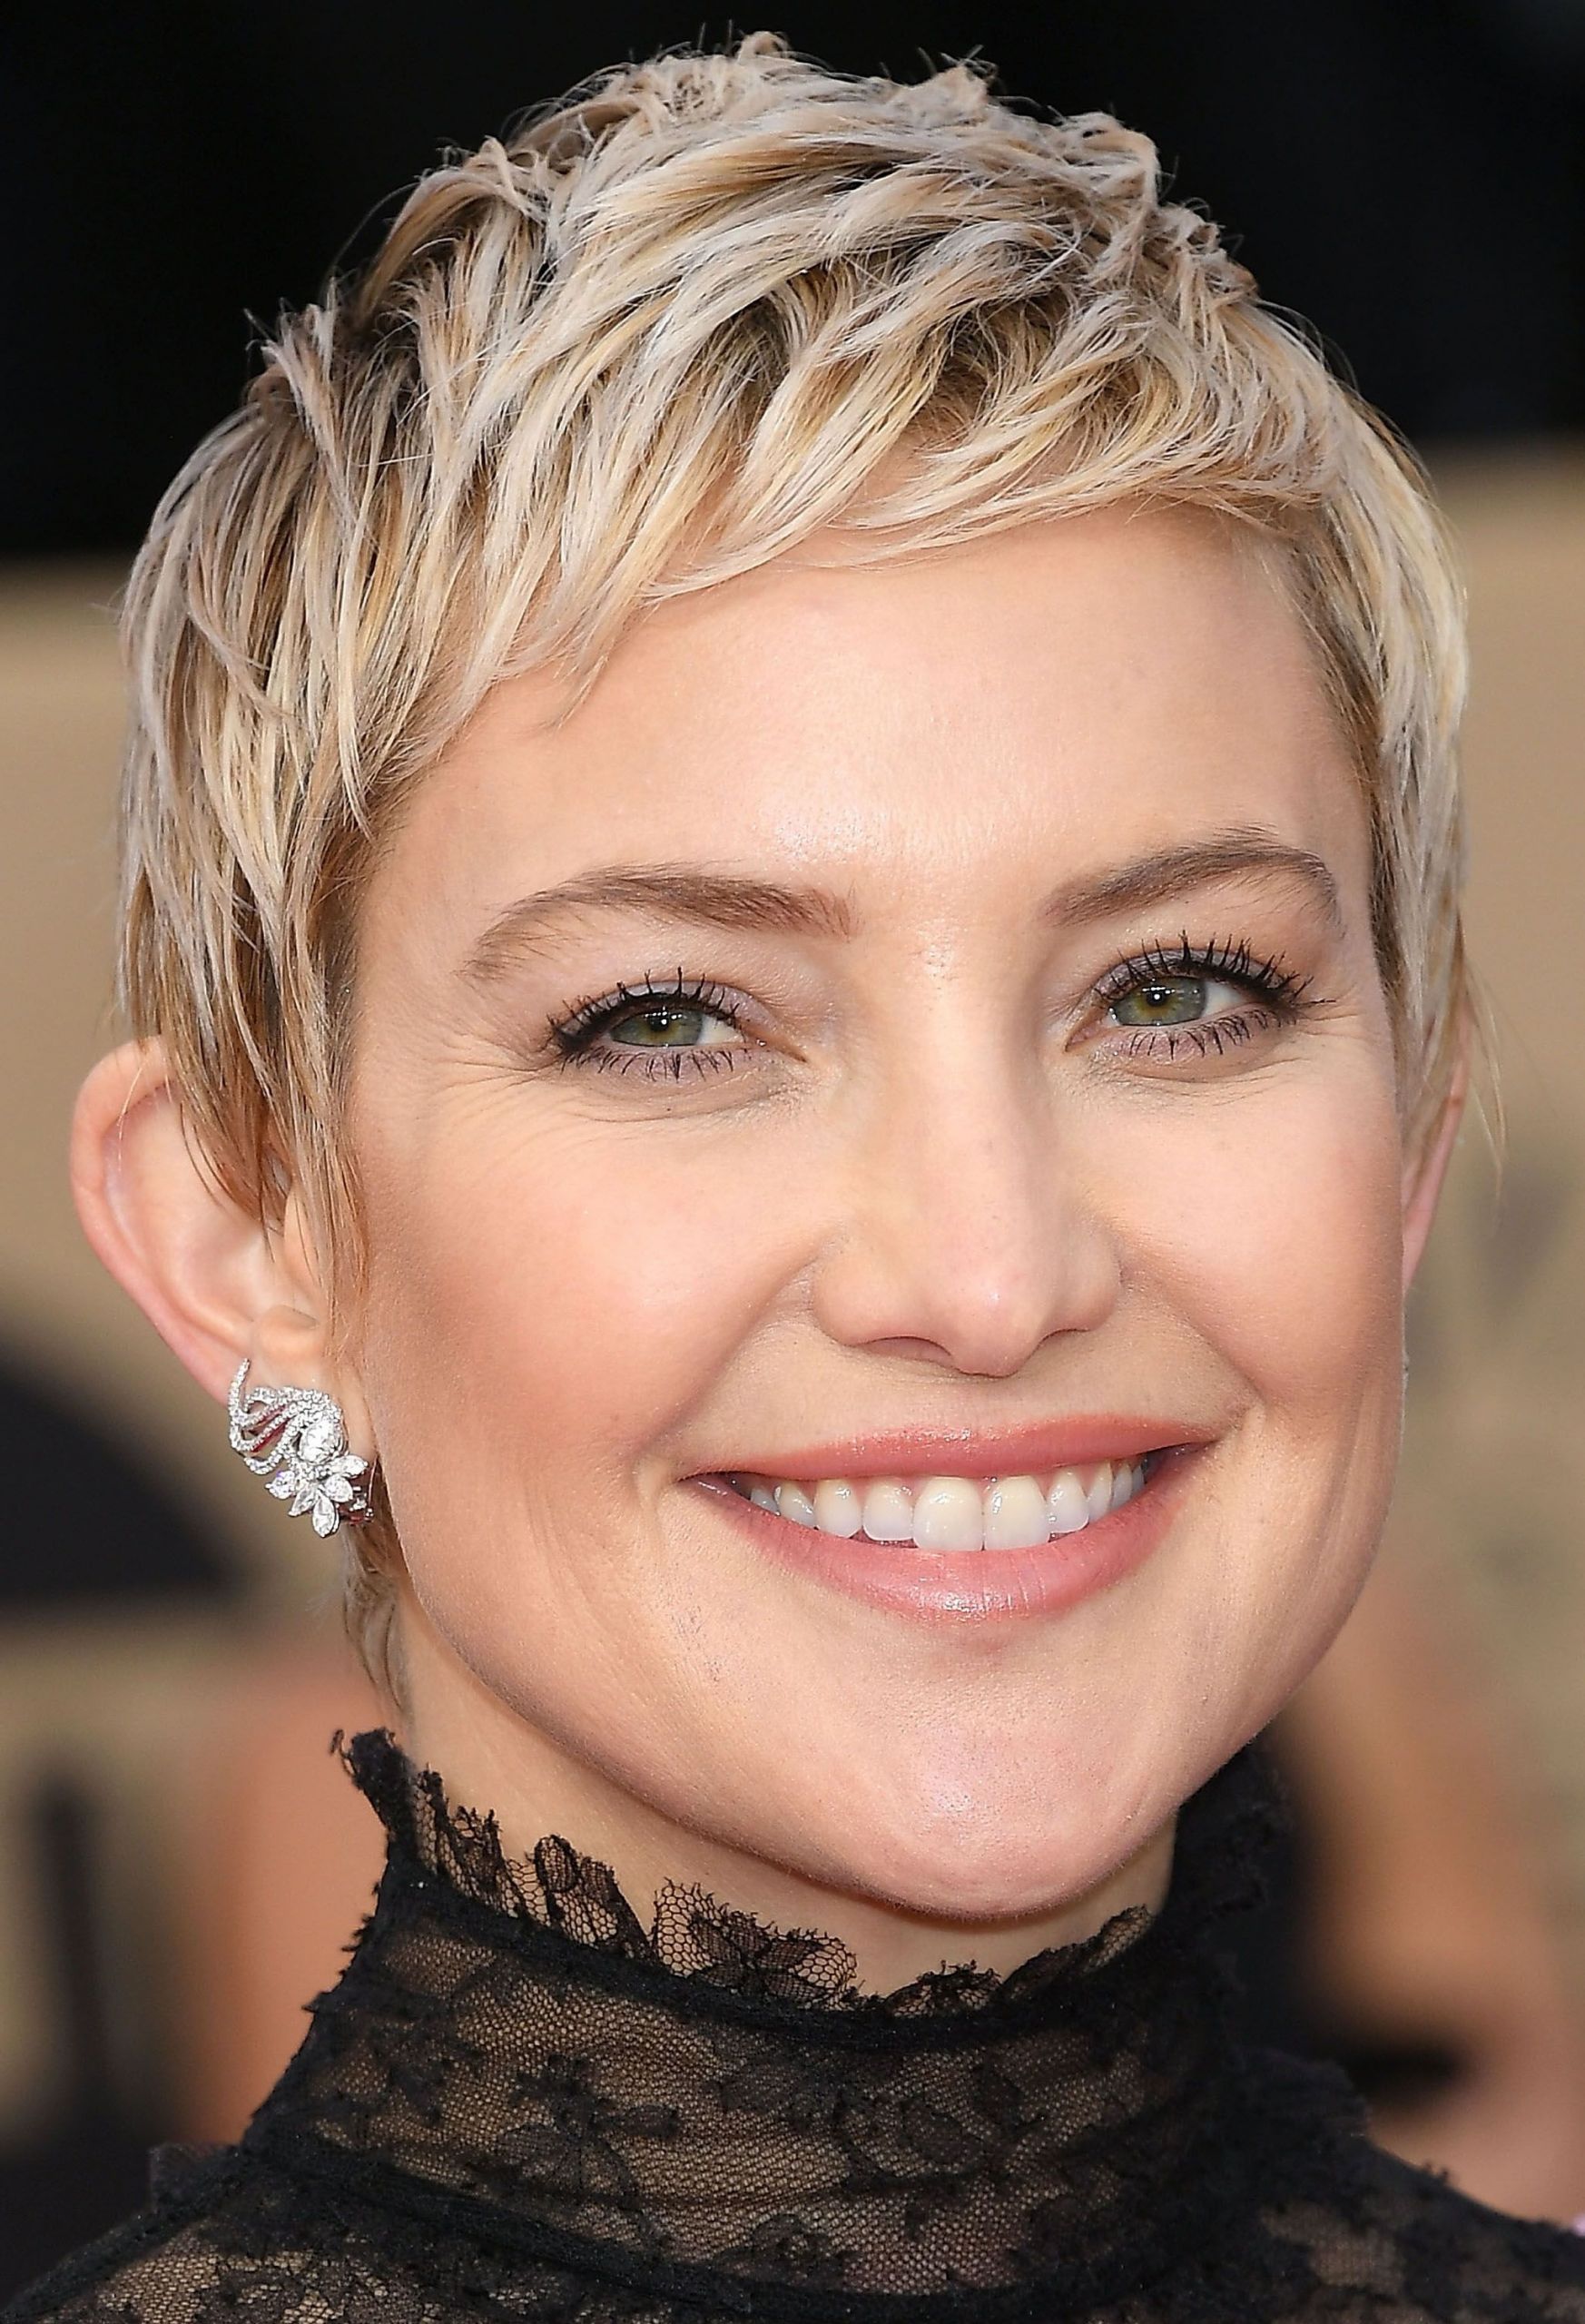 Cool Hairstyles For Women
 23 Cool Short Haircuts for Women for Killer Looks Short